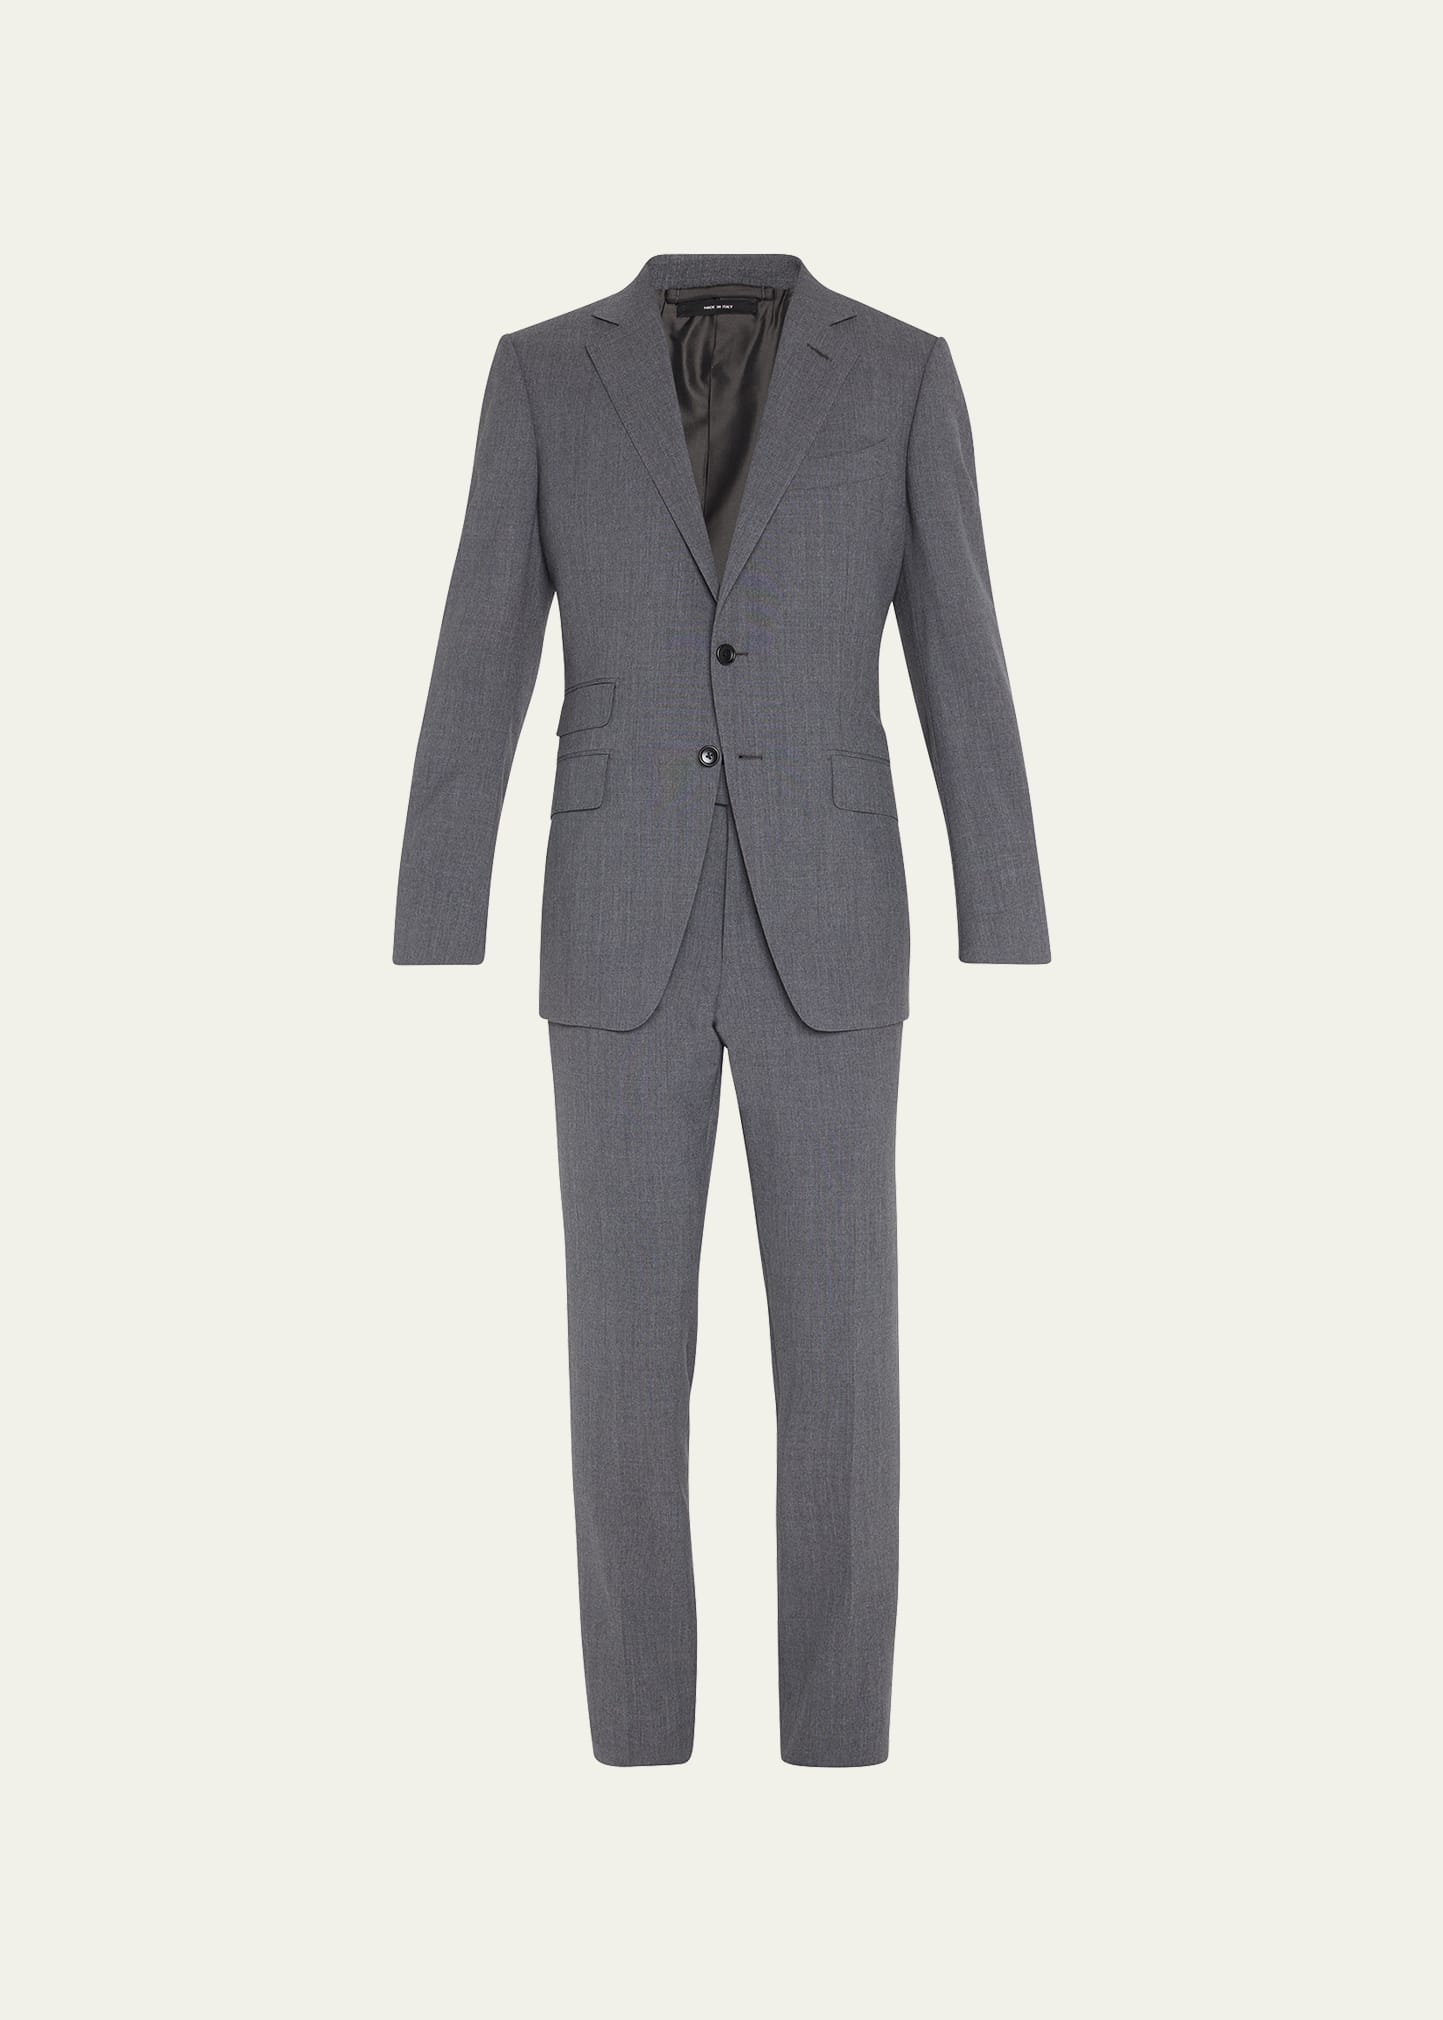 Tom Ford Men's O'connor Solid Wool Suit In Grey